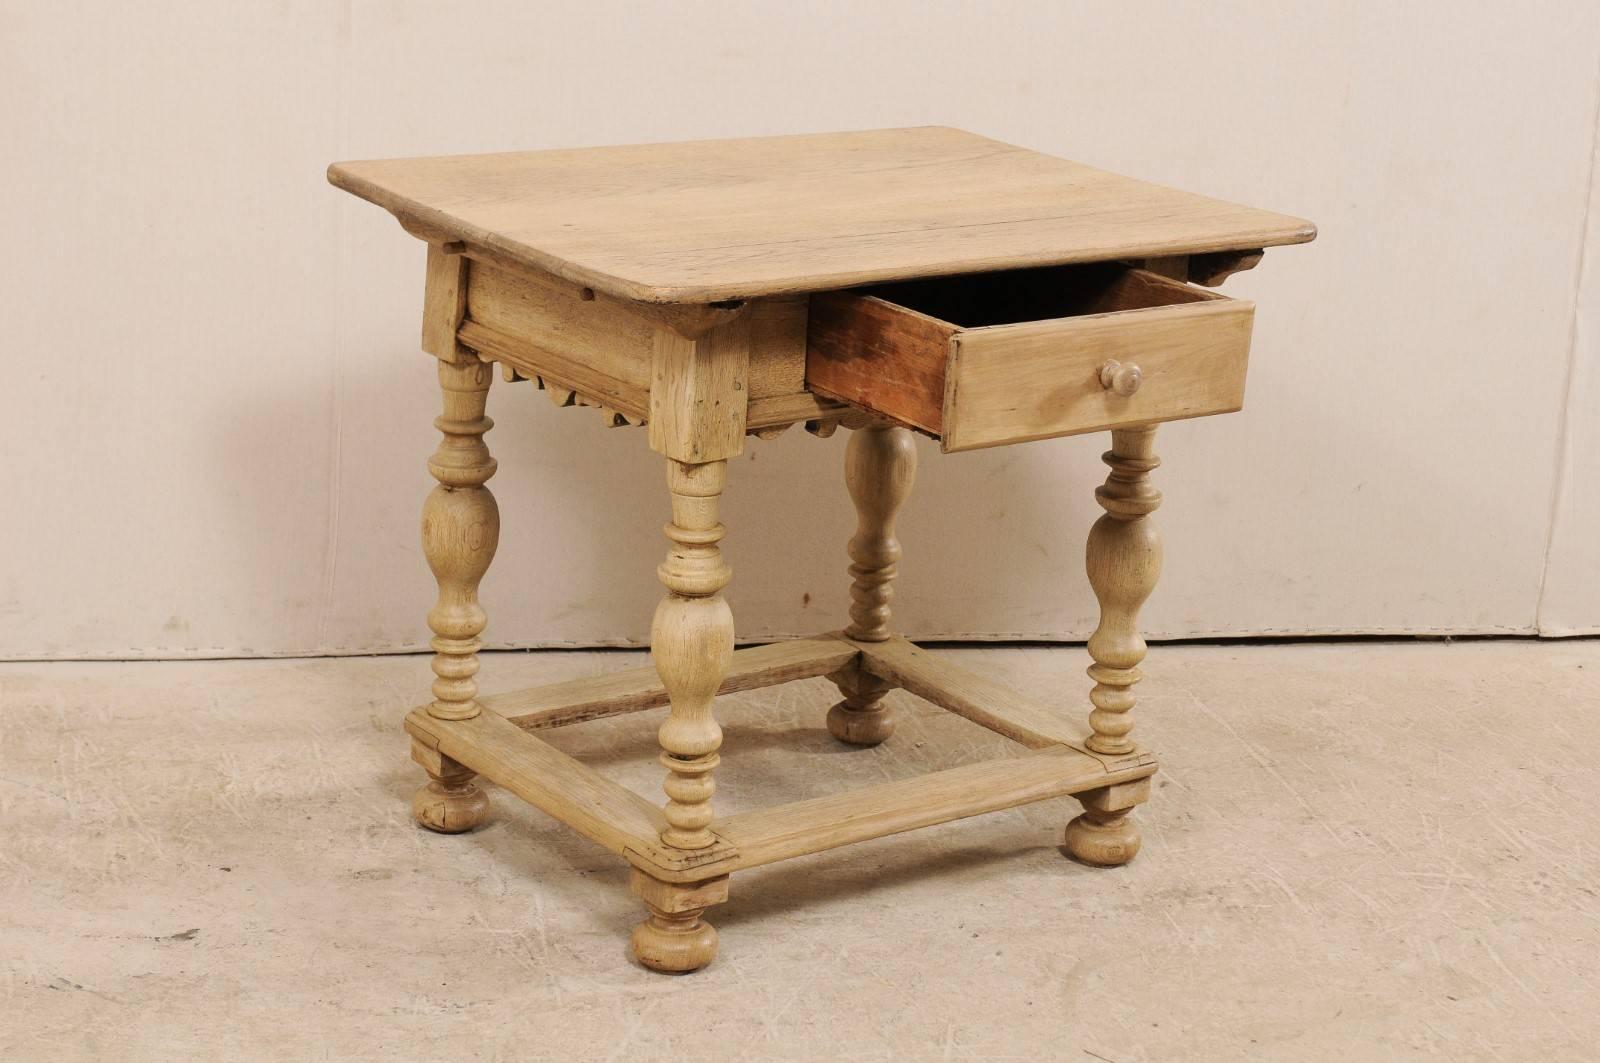 Bleached 18th Century Swedish Period Baroque Wood Side Table with Drawer on Turned Legs